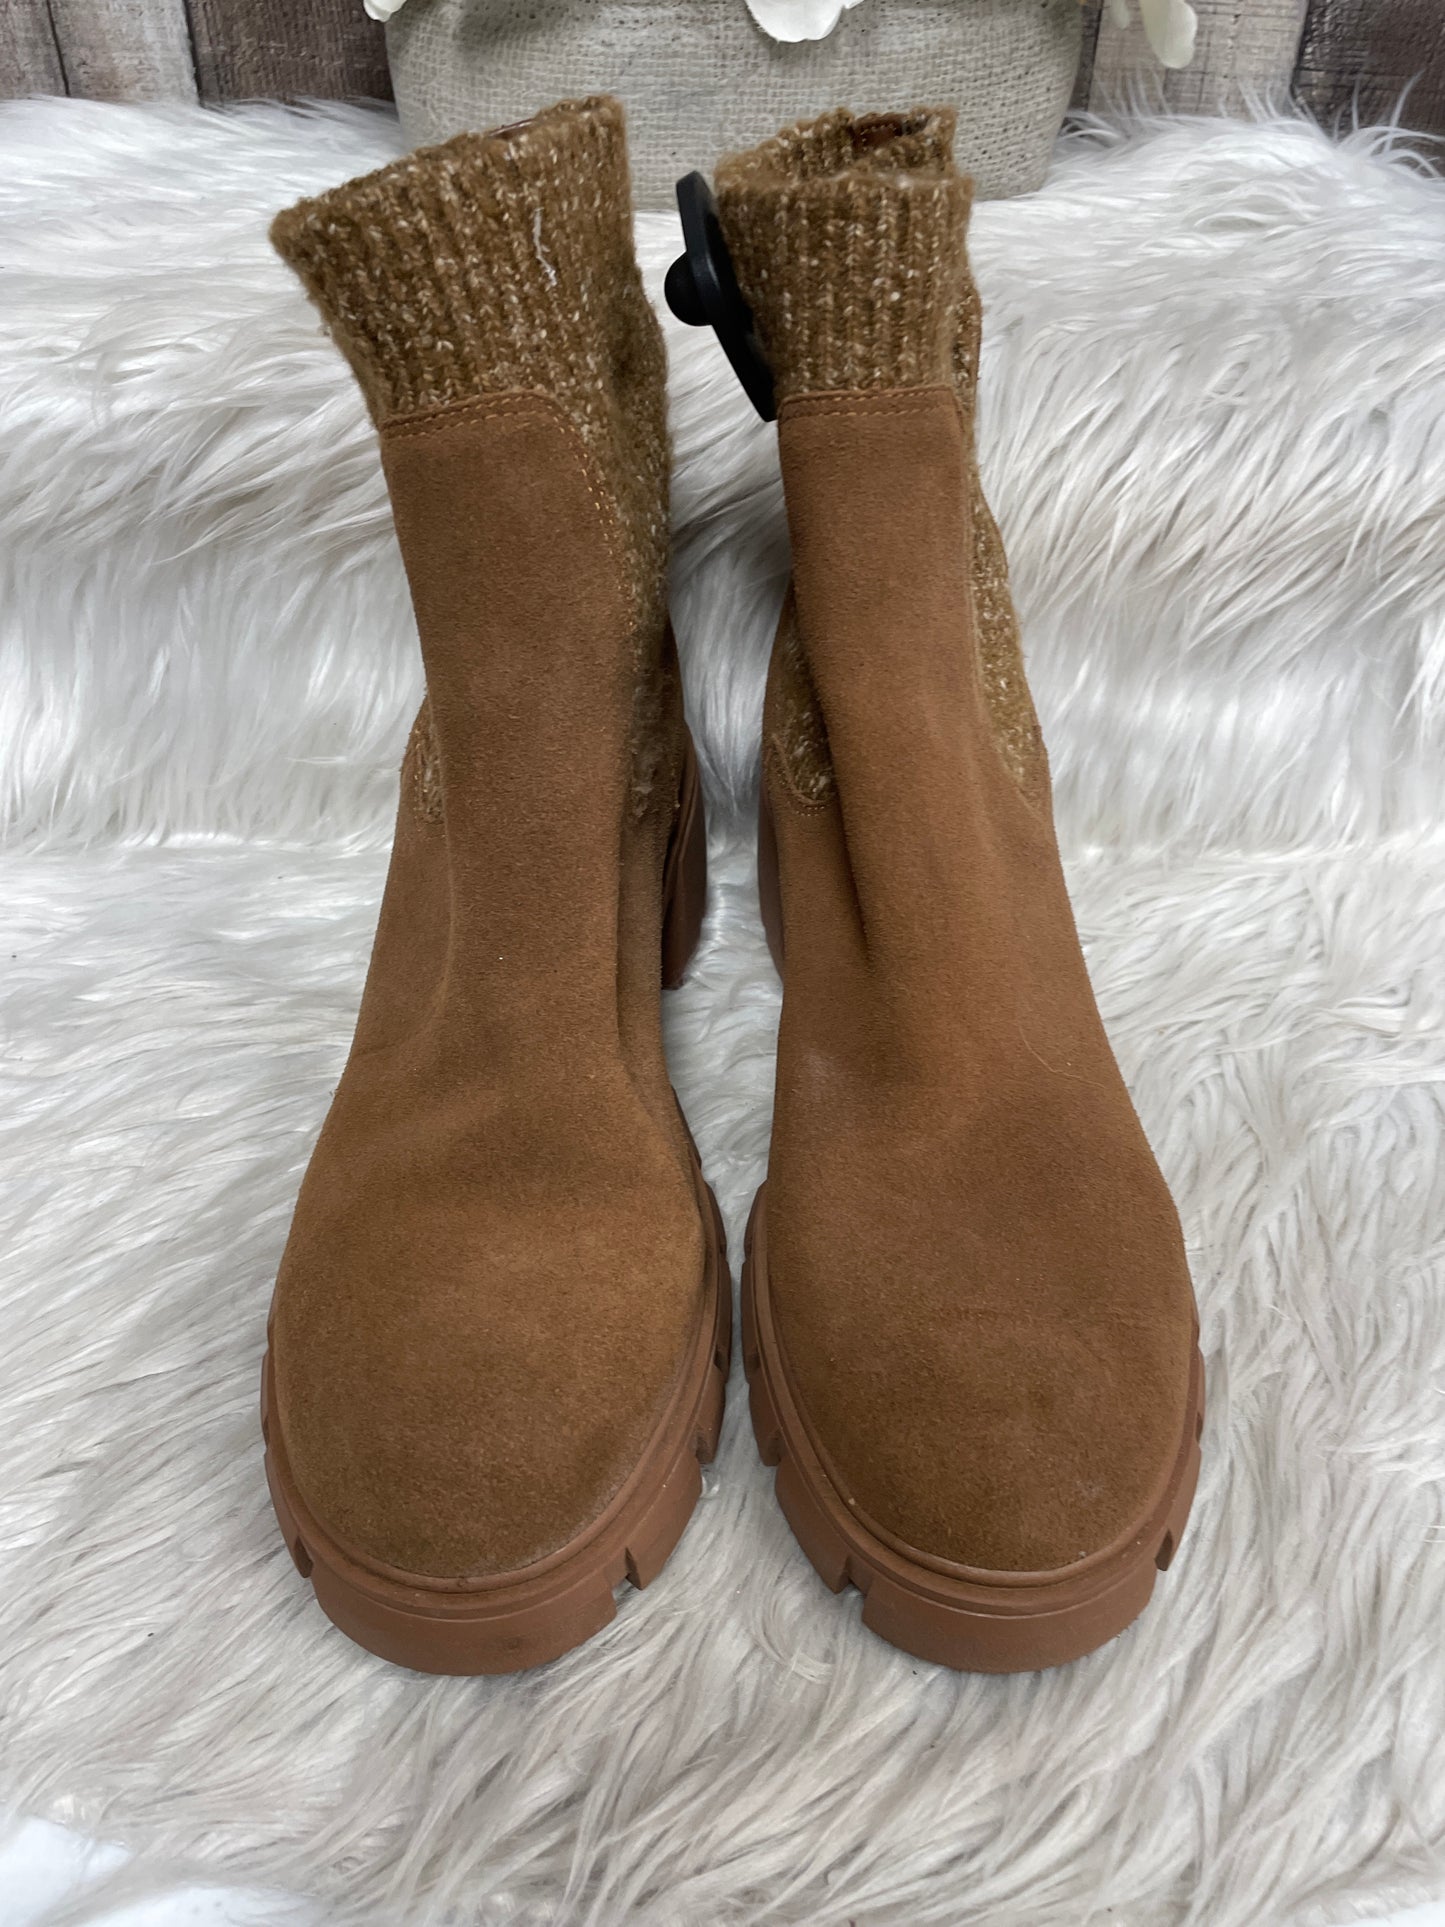 Boots Ankle Heels By Steve Madden  Size: 9.5